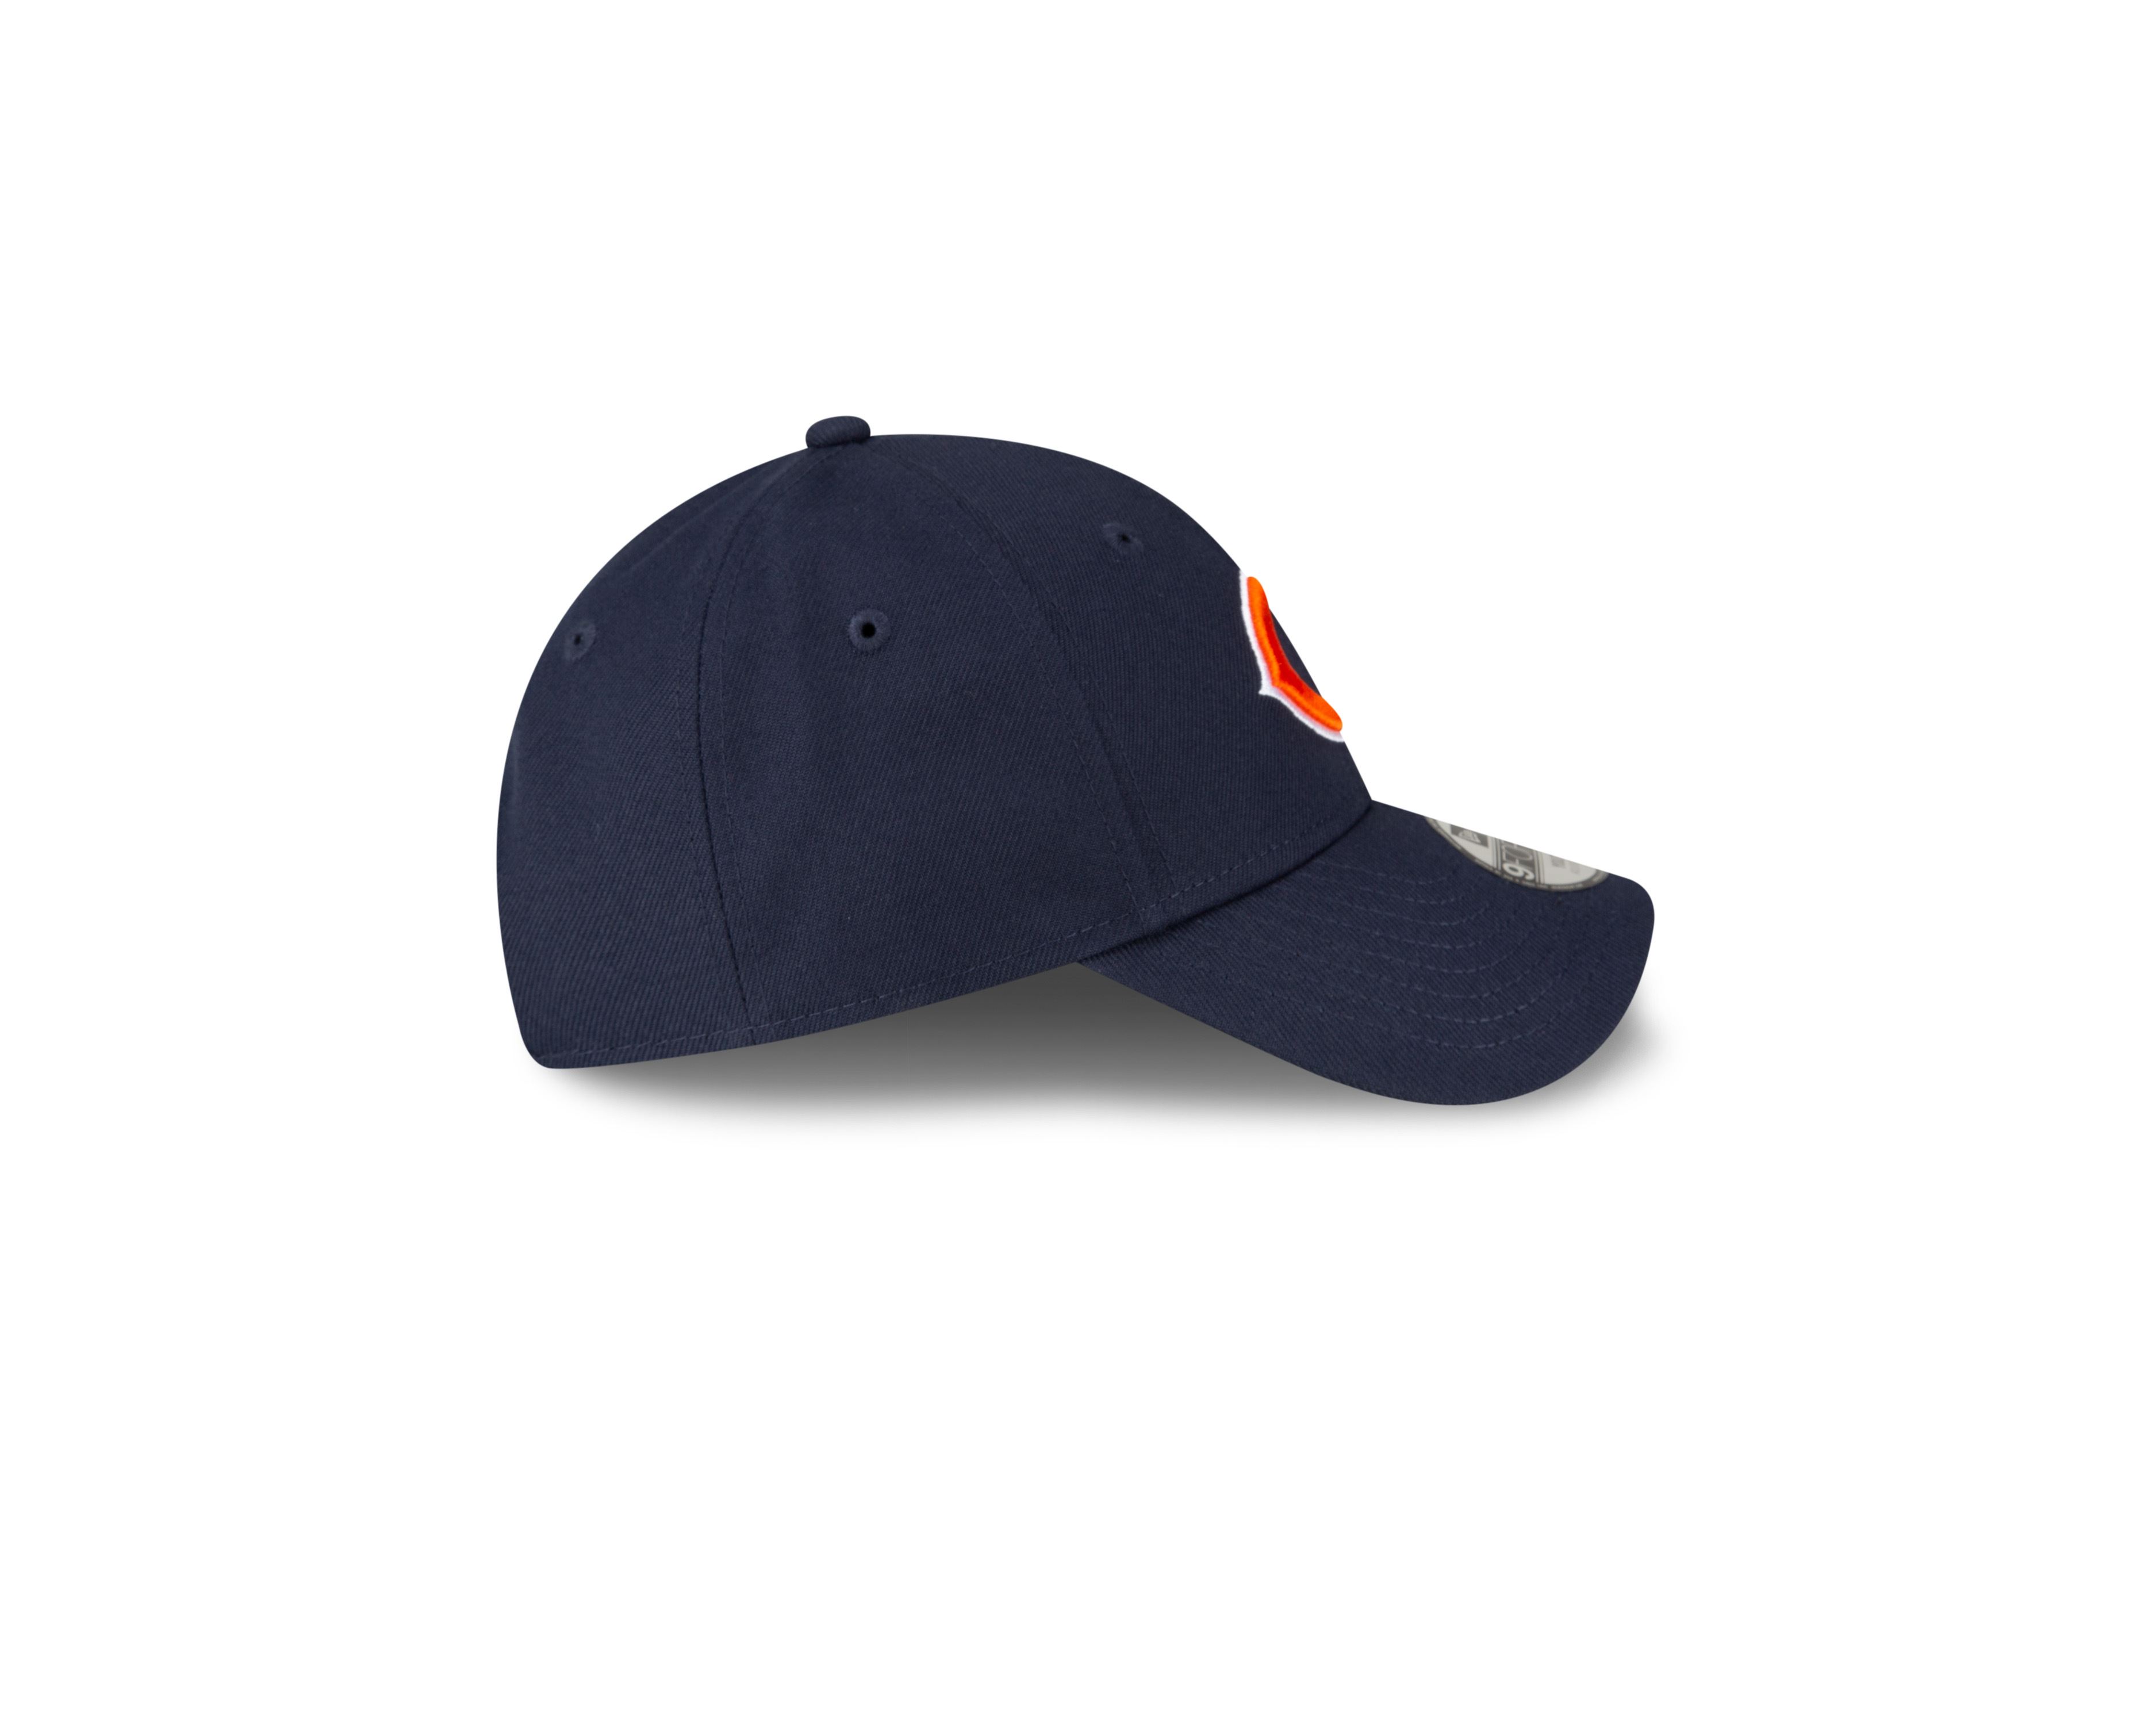 Chicago Bears NFL The League Blue 9Forty Adjustable Cap for Kids New Era